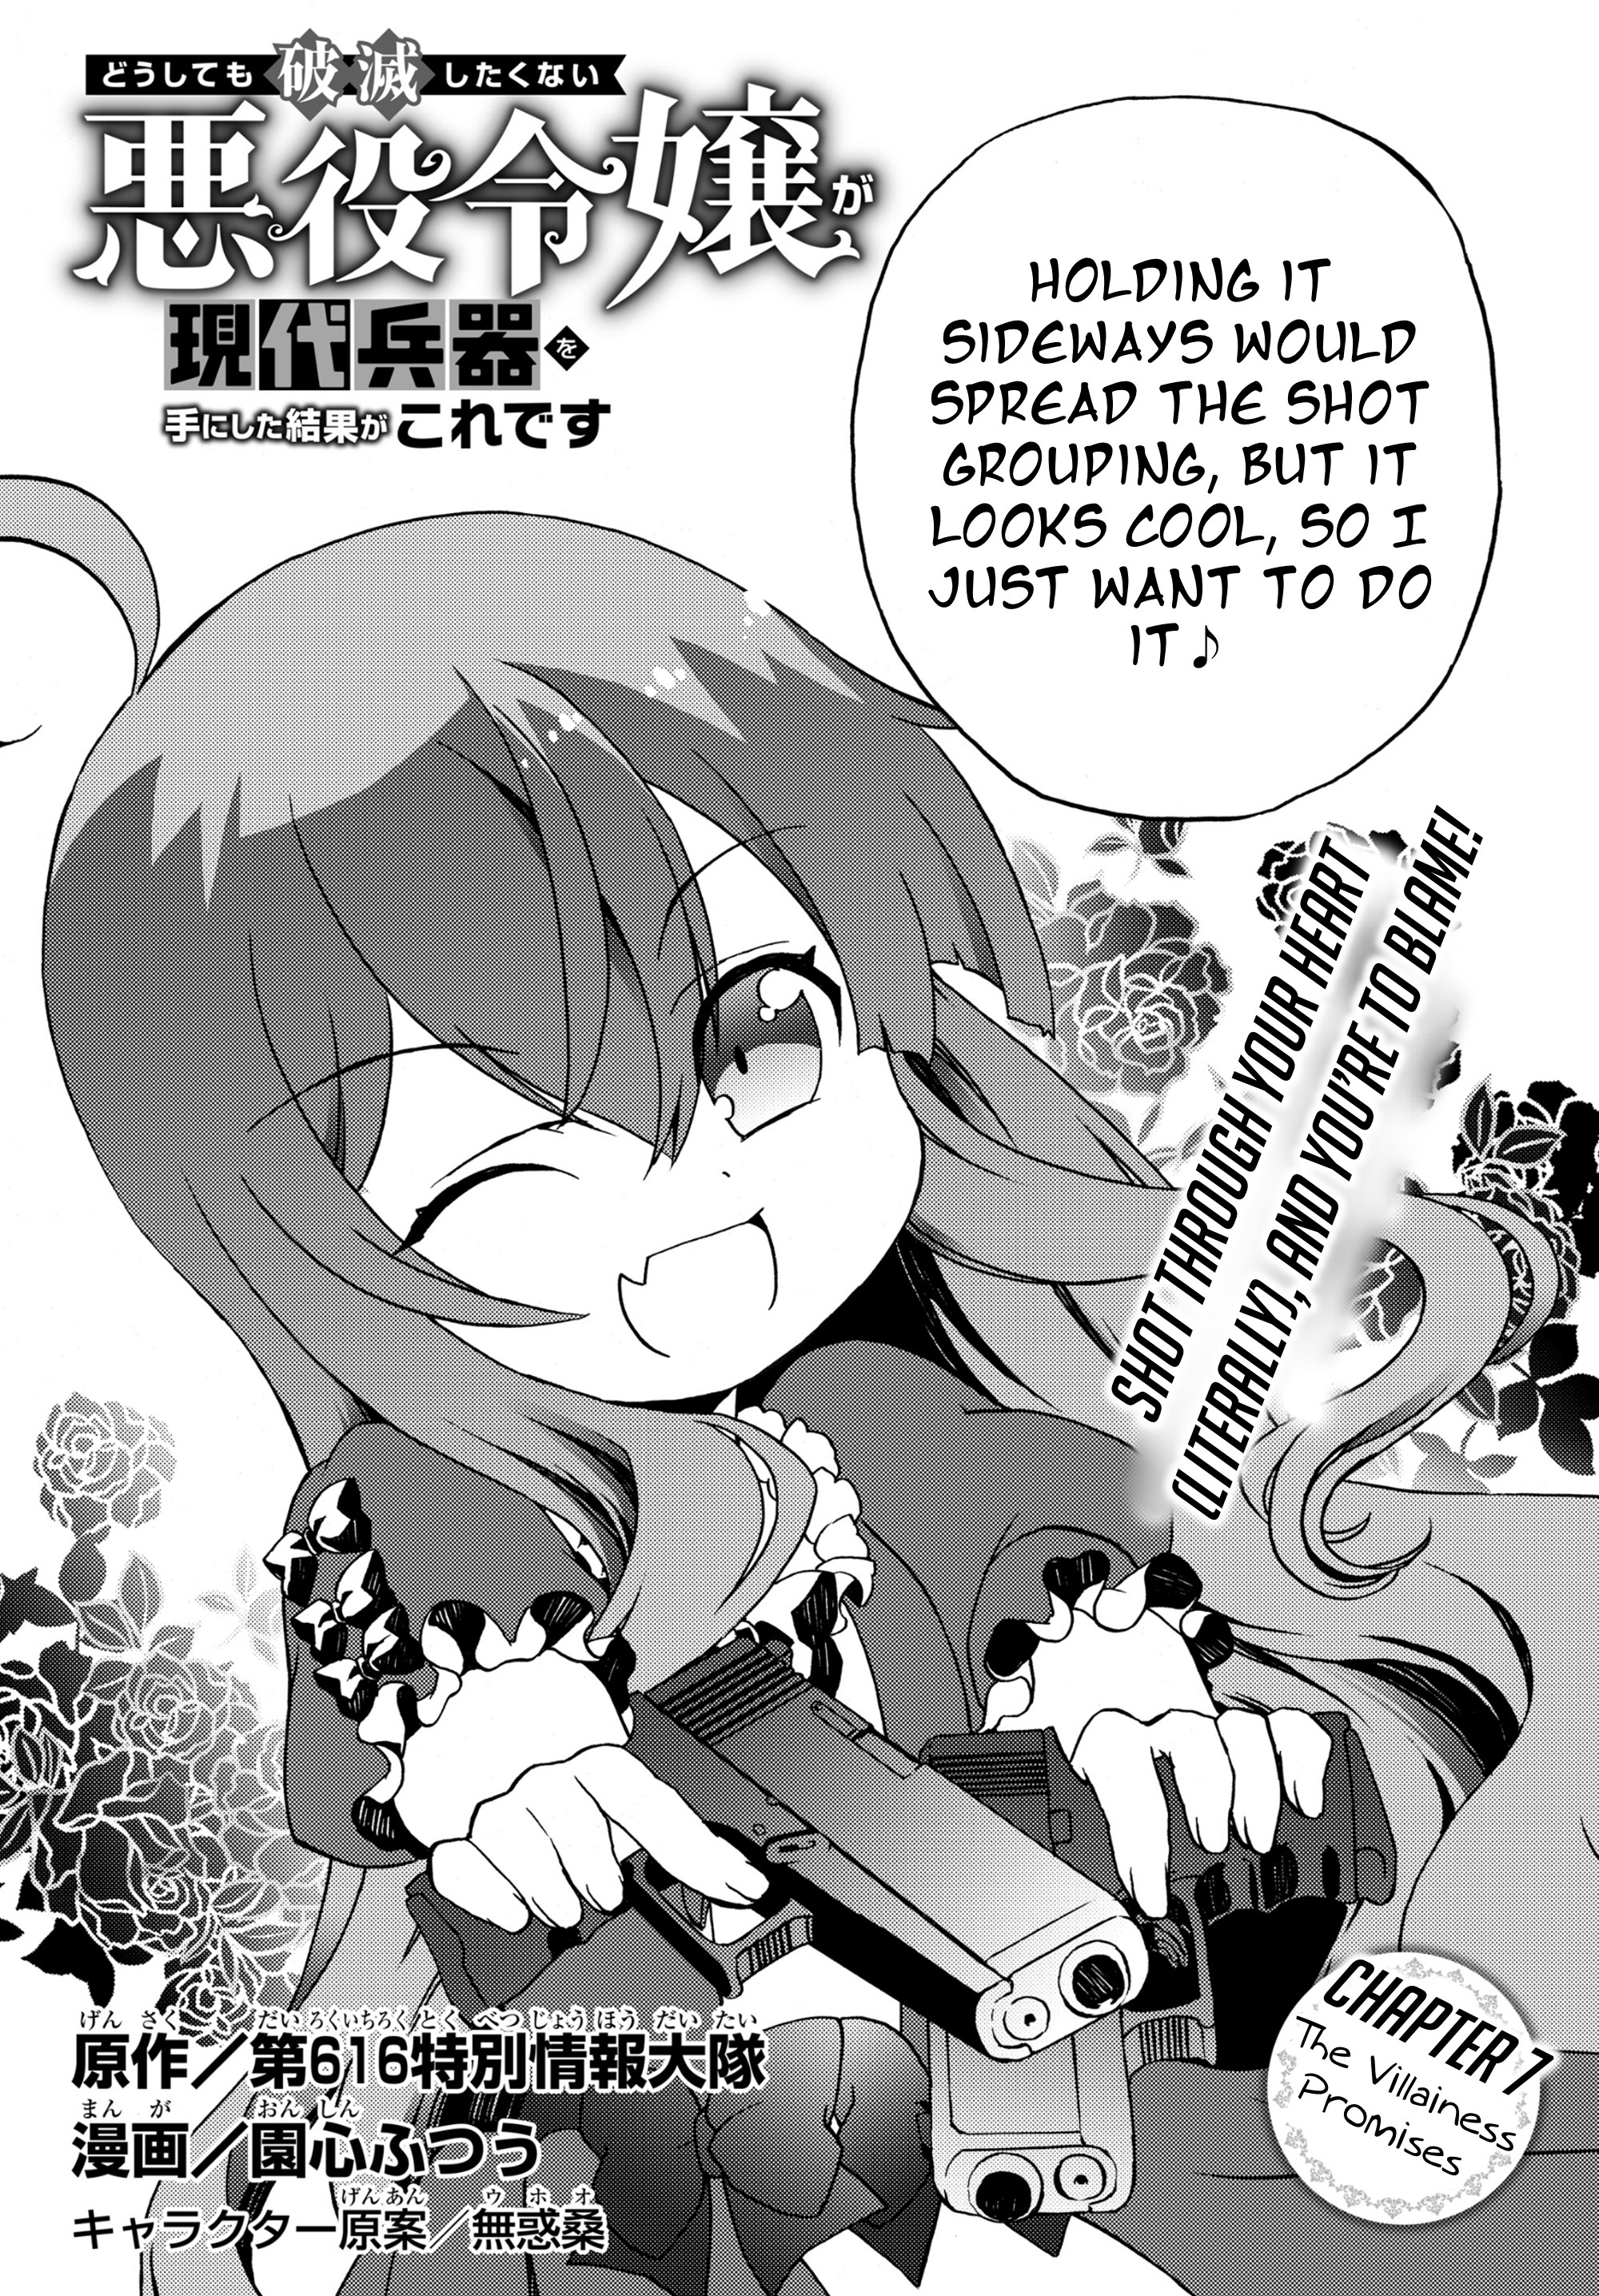 The Villainess Will Crush Her Destruction End Through Modern Firepower Vol.1 Chapter 7: The Villainess Promises - Picture 2